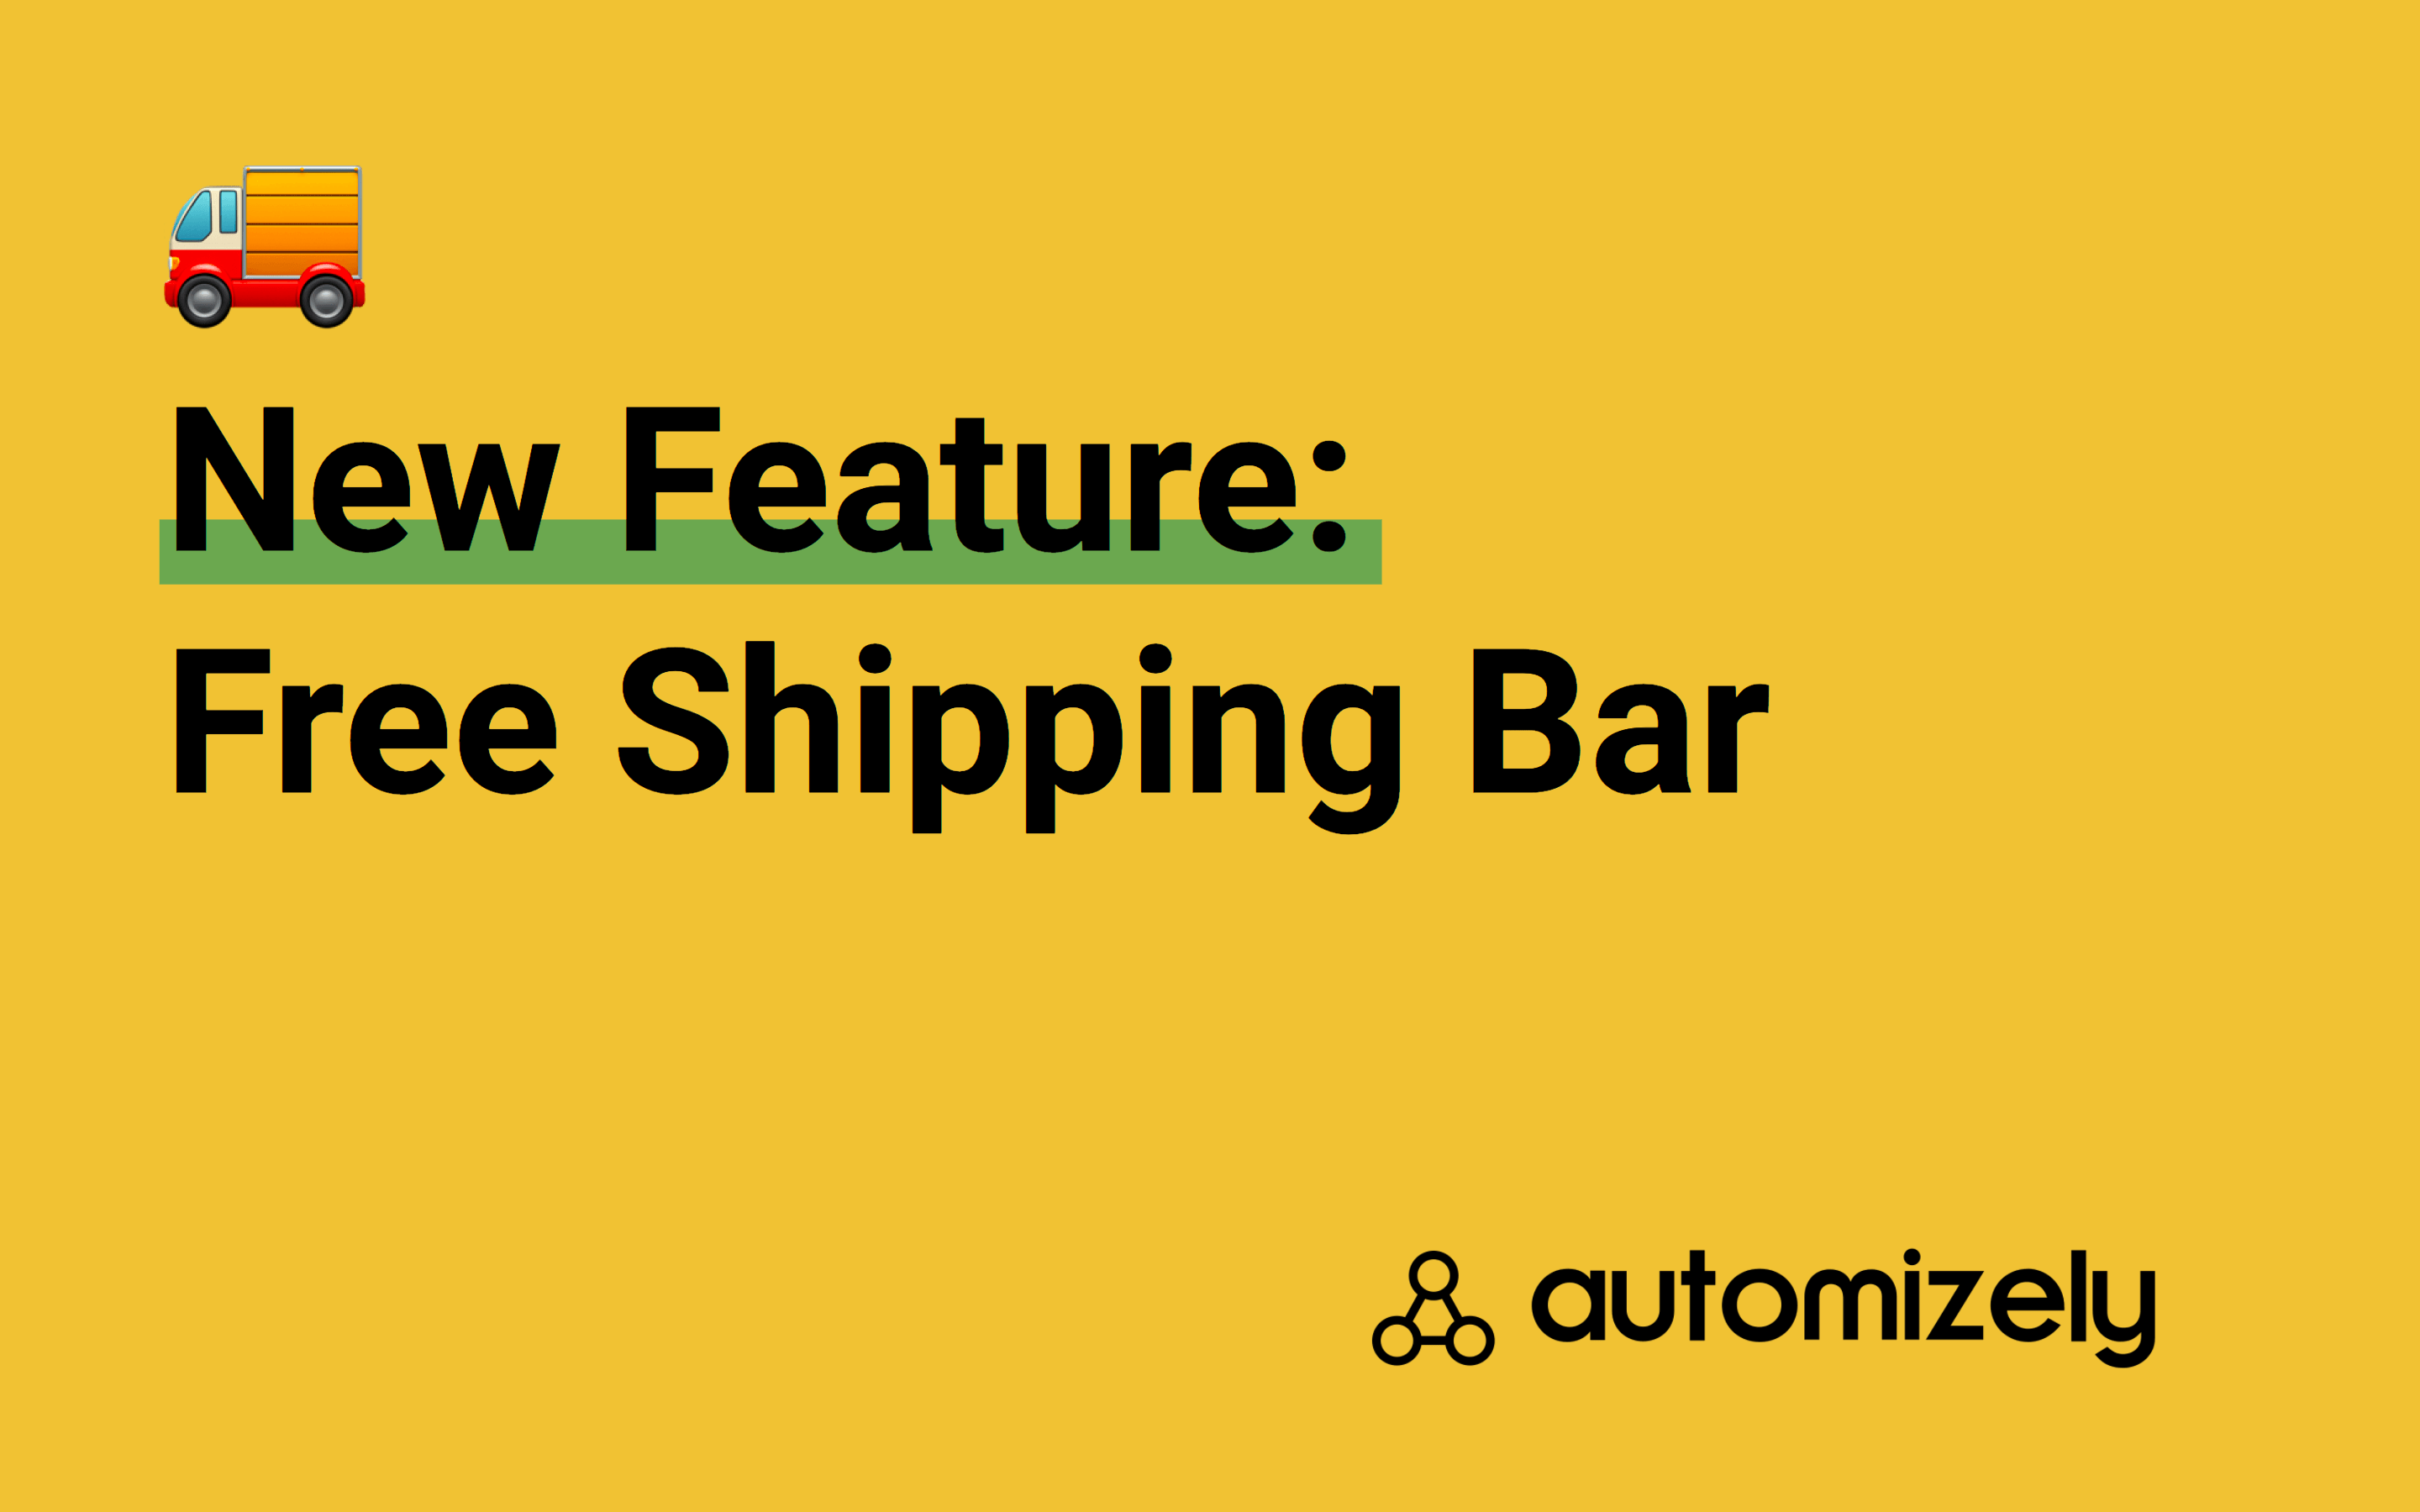 New Feature: Free Shipping Bar